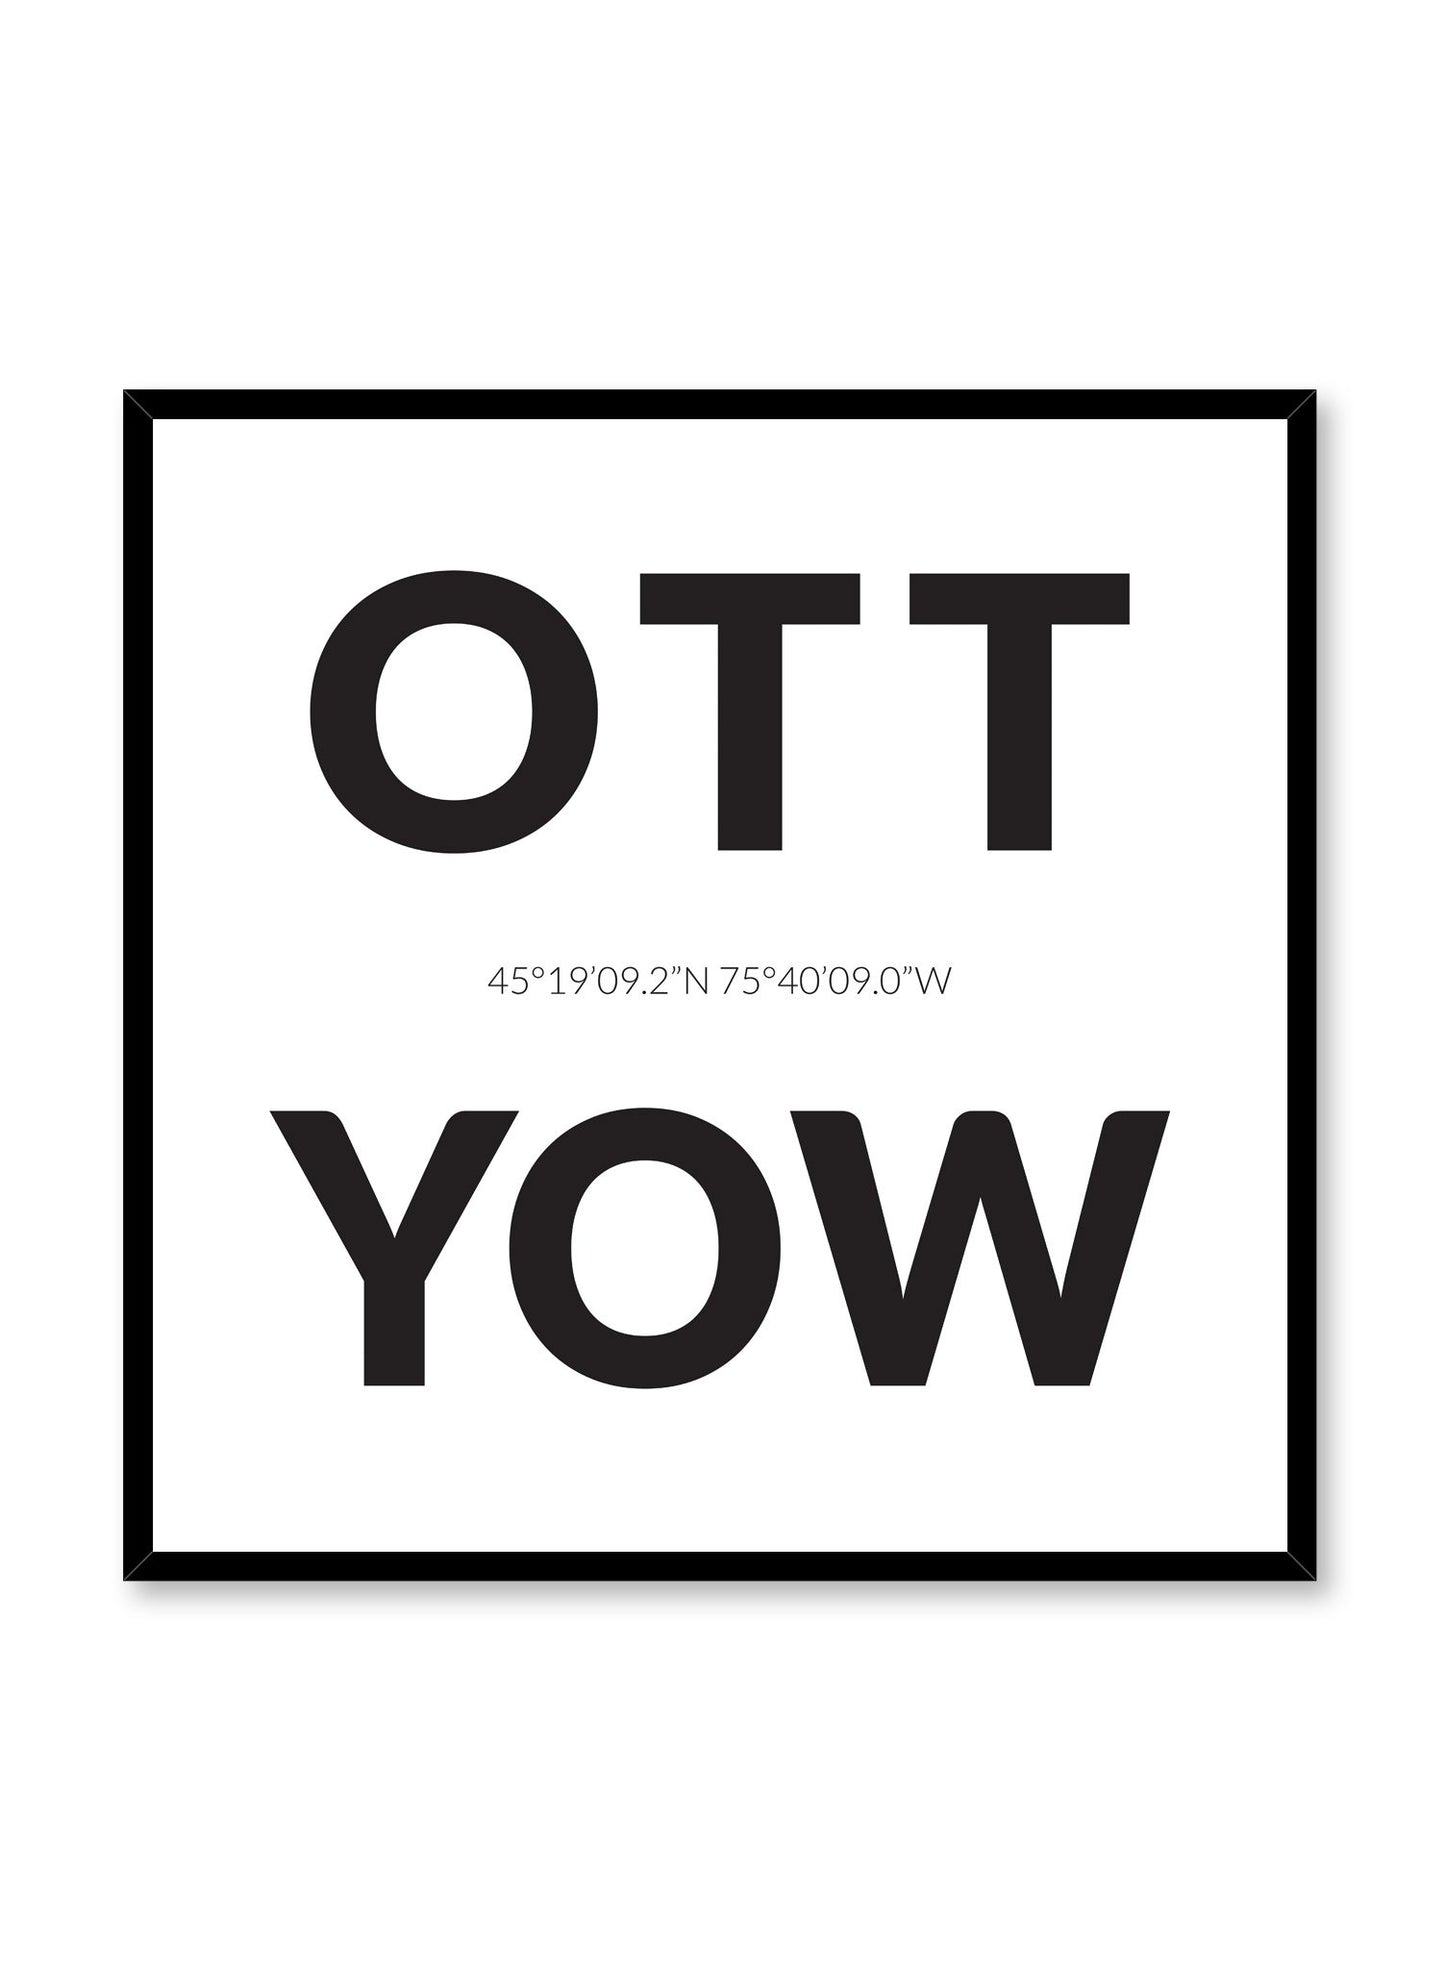 Minimalist design poster by Opposite Wall with airport code Ottawa YOW